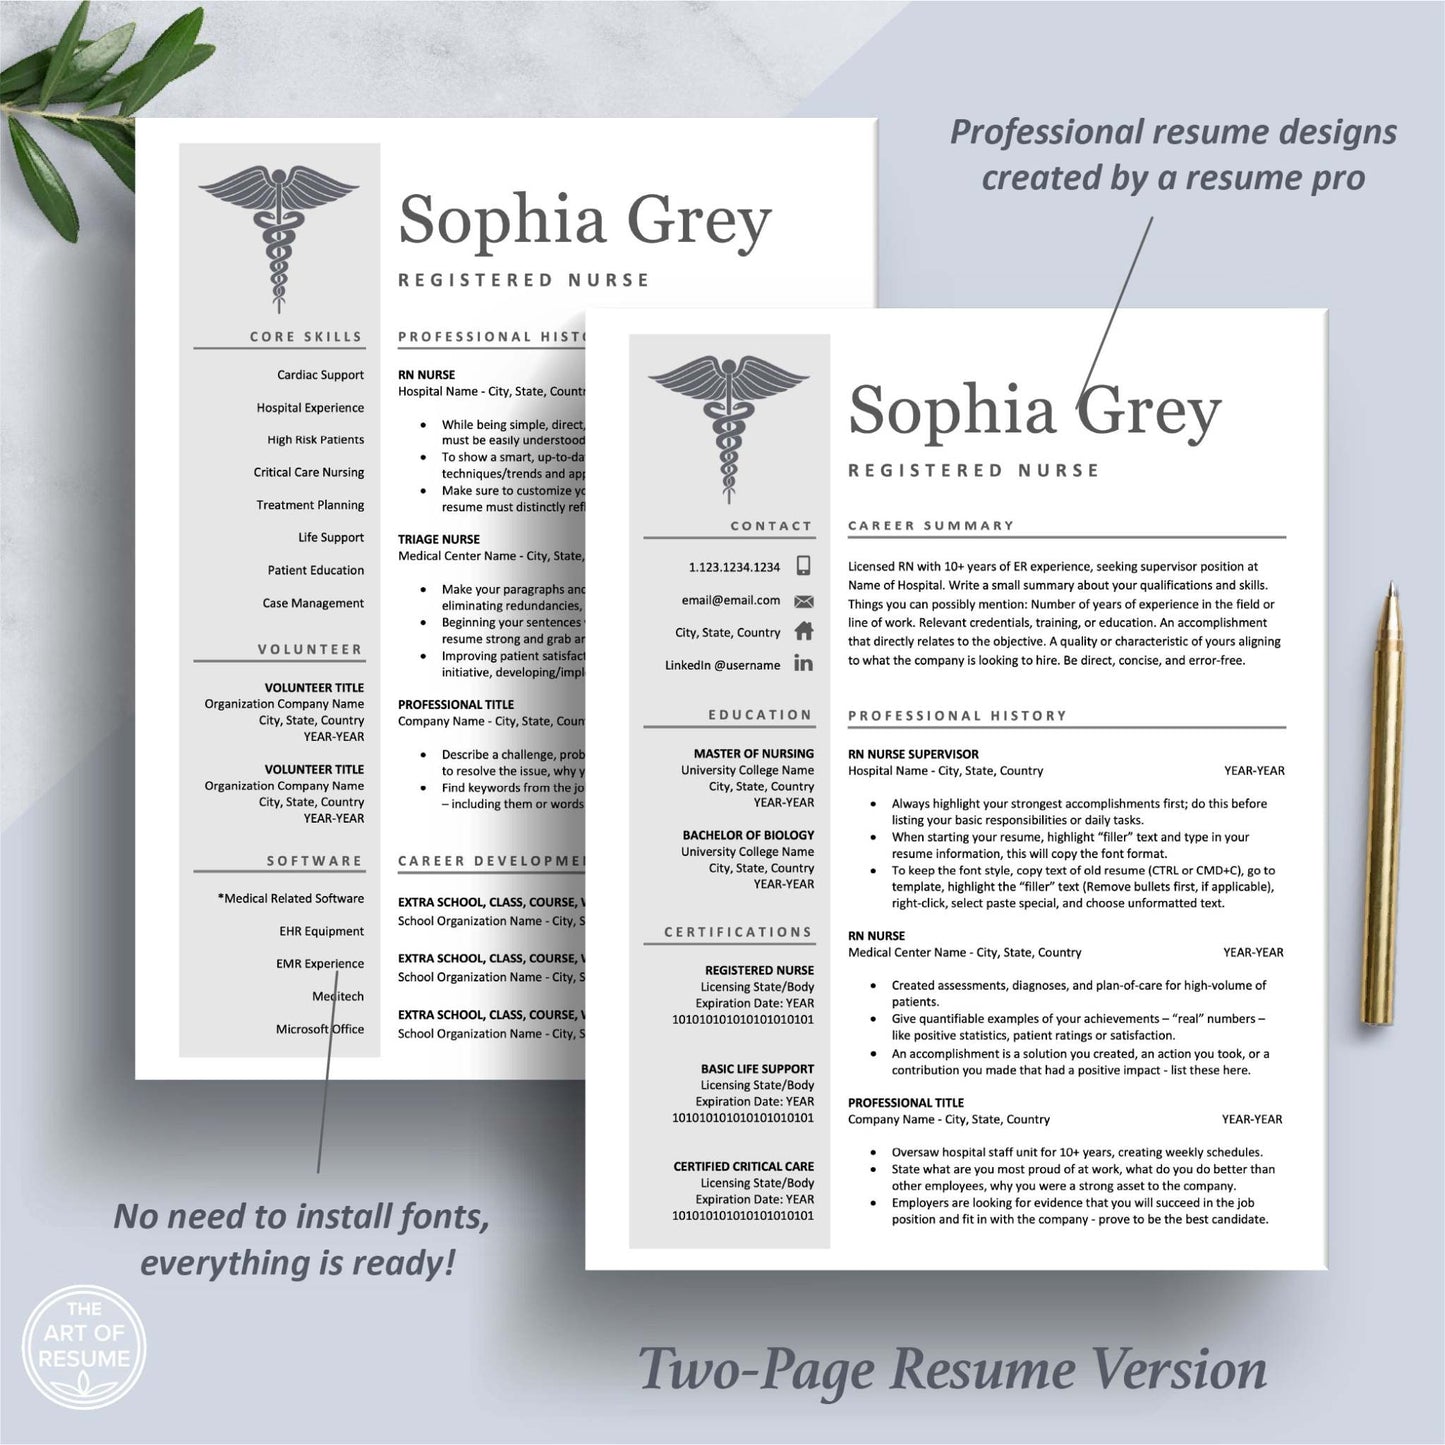 The Art of Resume Templates | Two Page Medical, Nurse, Doctor Executive Resume CV Template | Curriculum Vitae